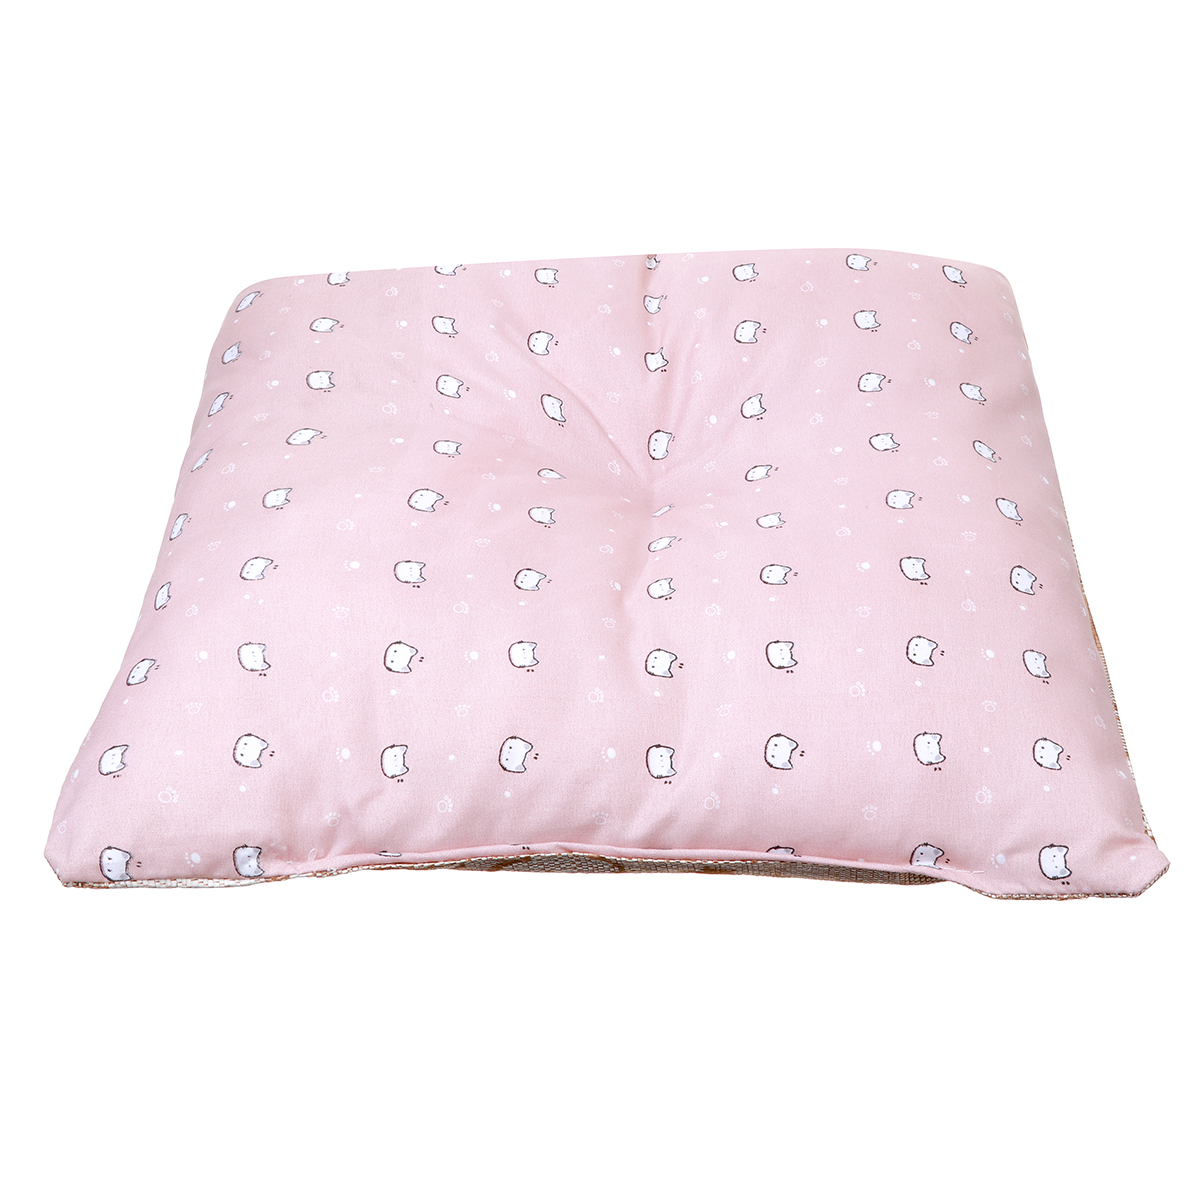 Pet-Tent-Cat-Bed-Puppy-House-Cushion-Pad-Bed-Flamingo-Pattern-Indo-1825833-12